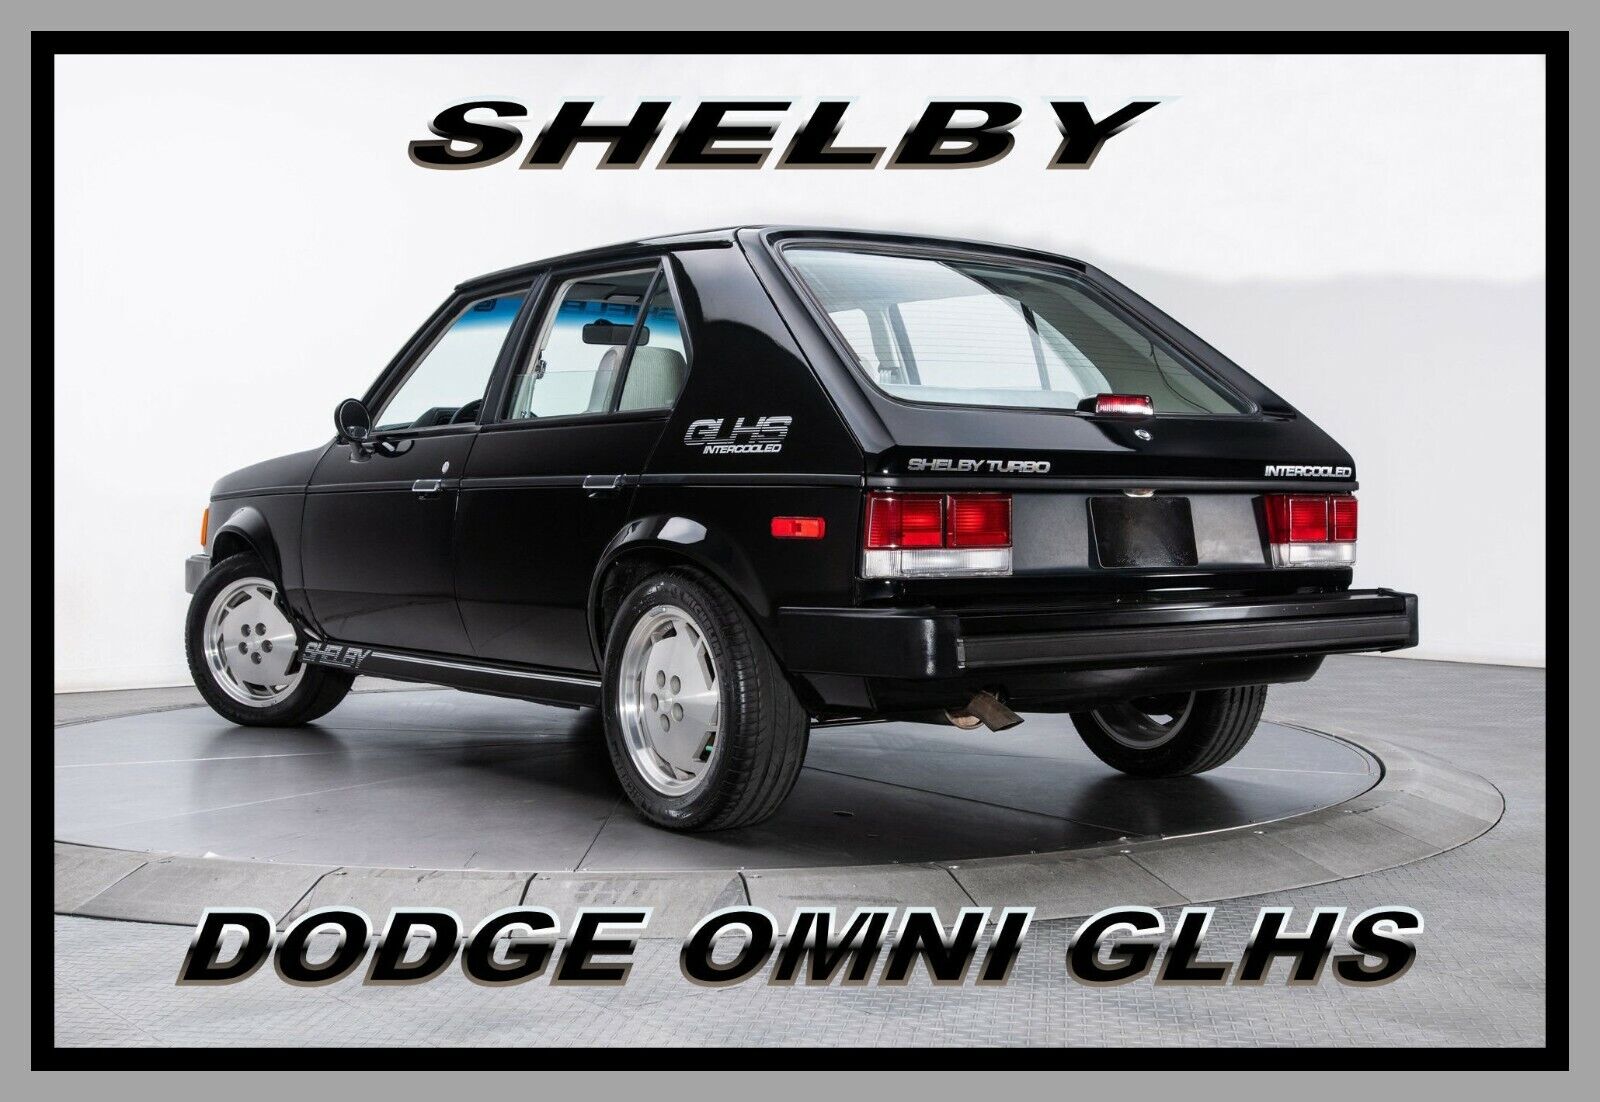 1986 Dodge Omni GLH Shelby Turbo, Refrigerator Magnet, 42 MIL Thick